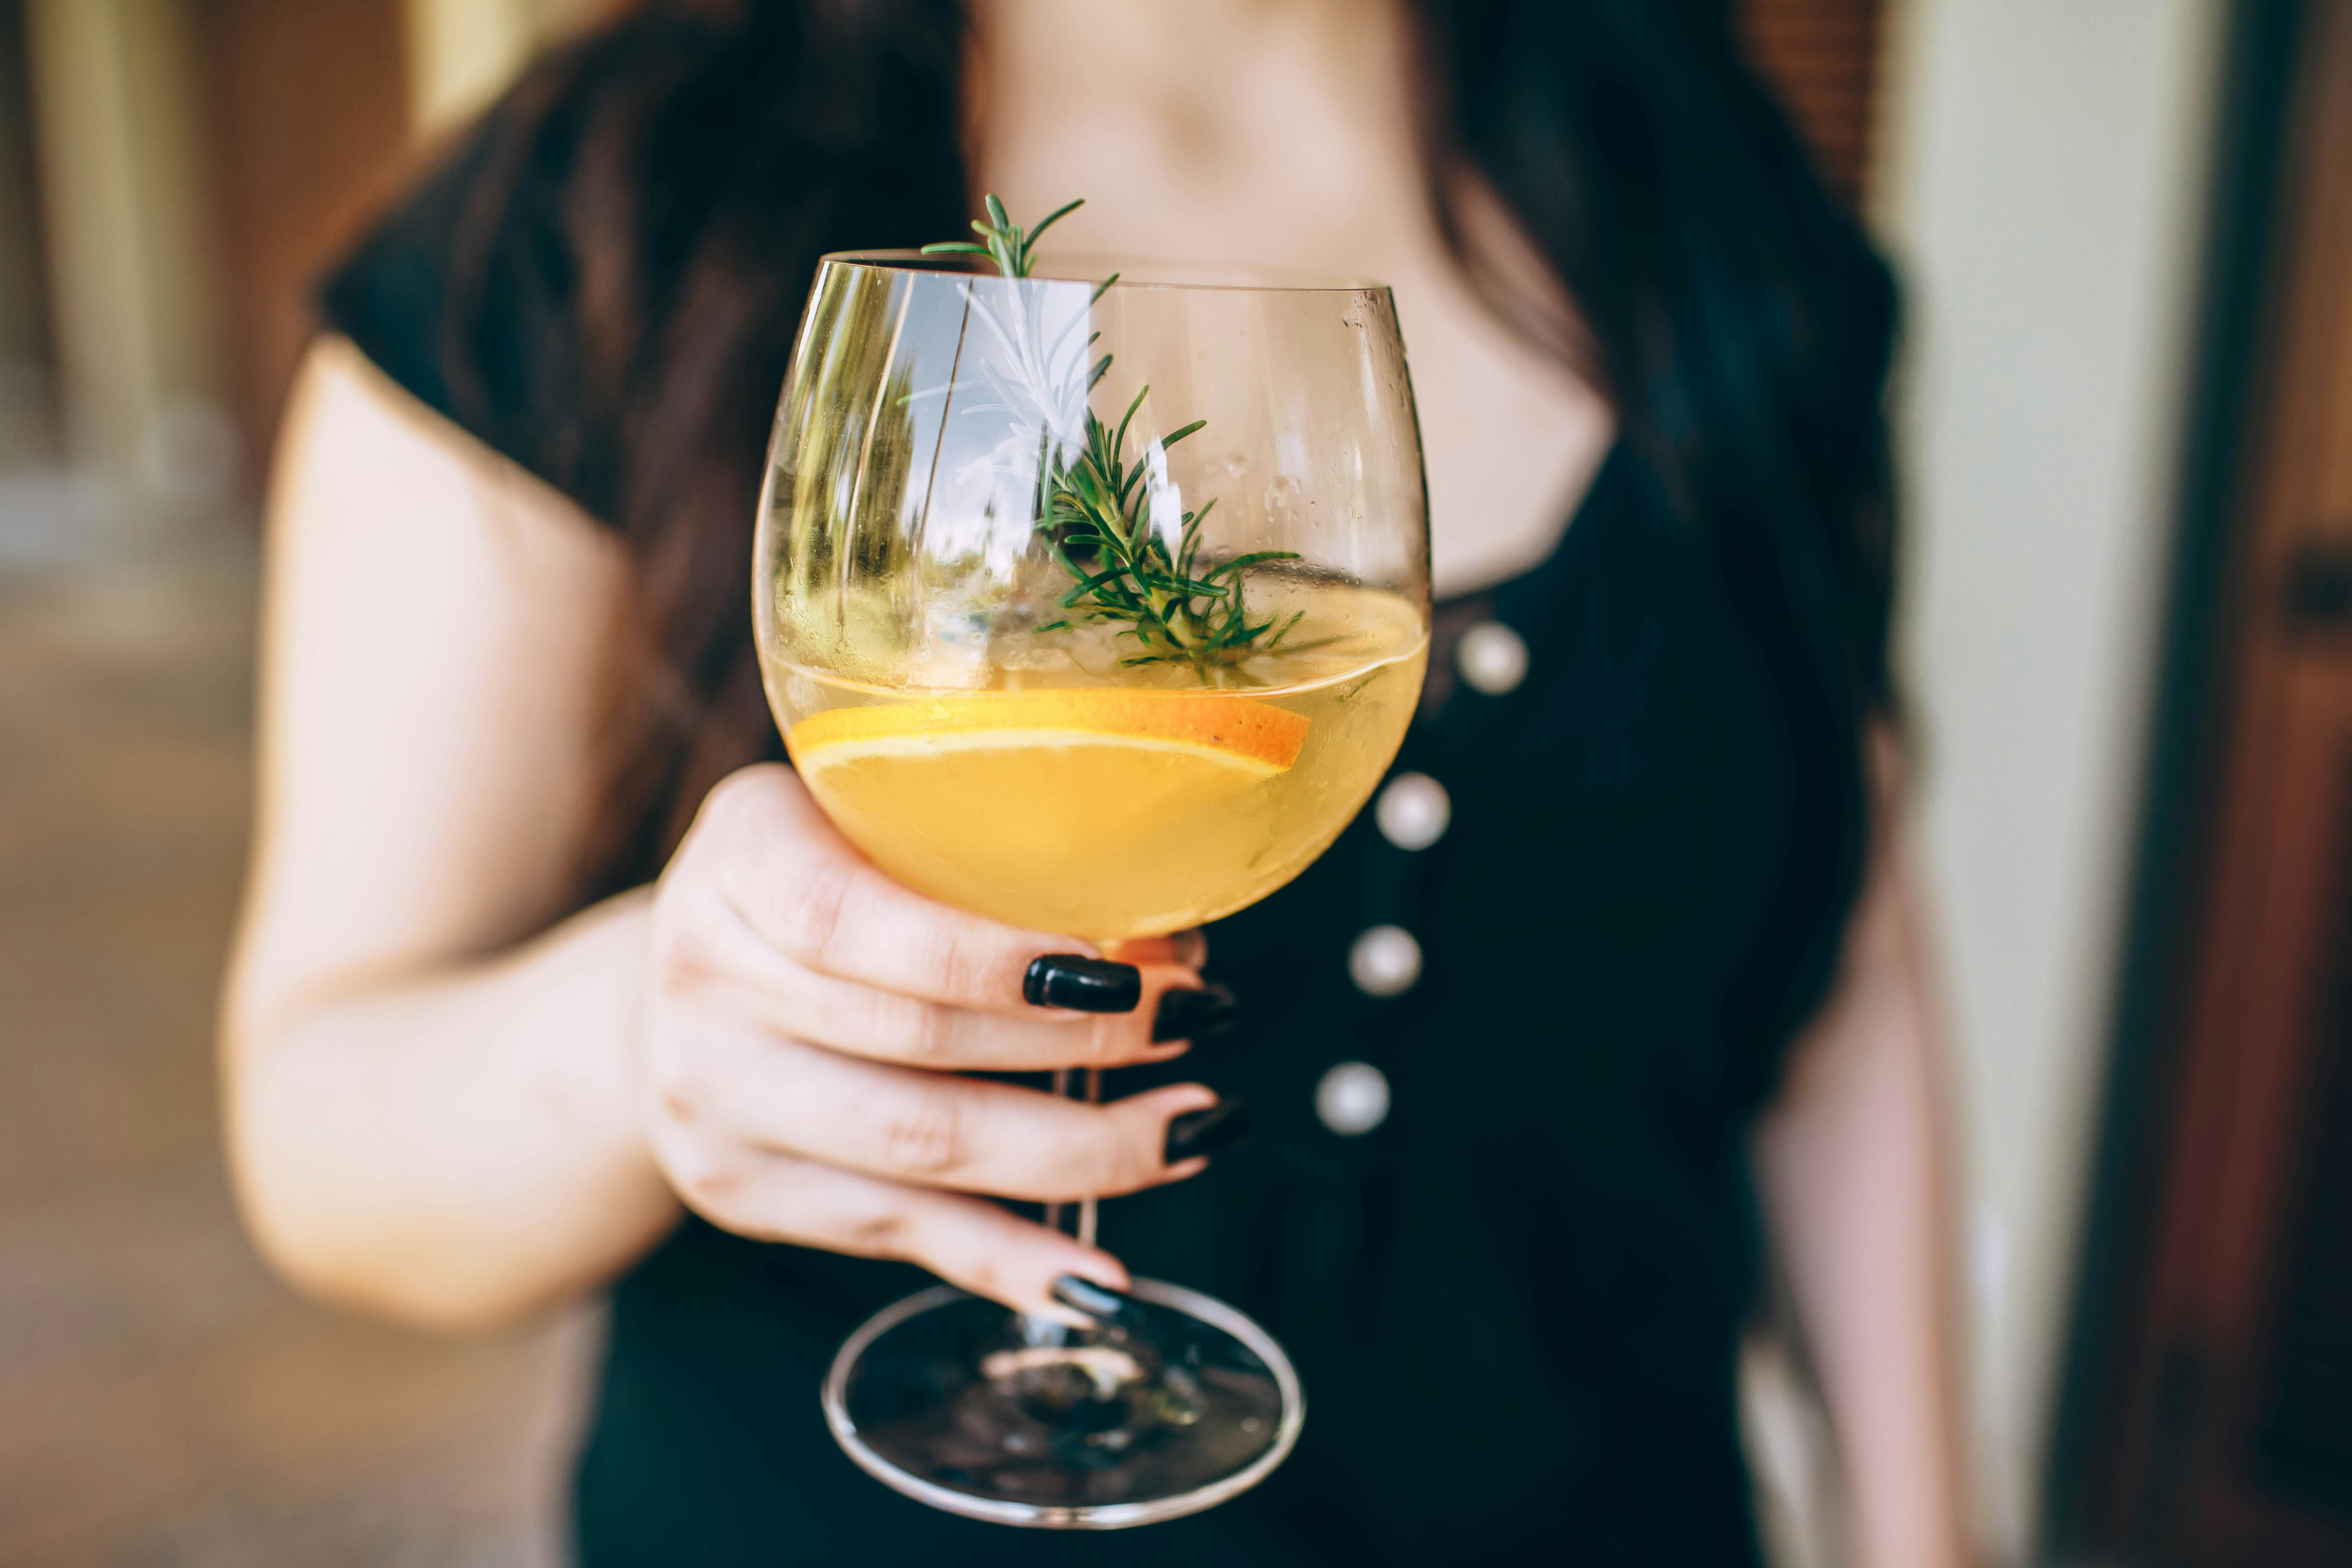 woman holding clear wine glass with yellow liquid